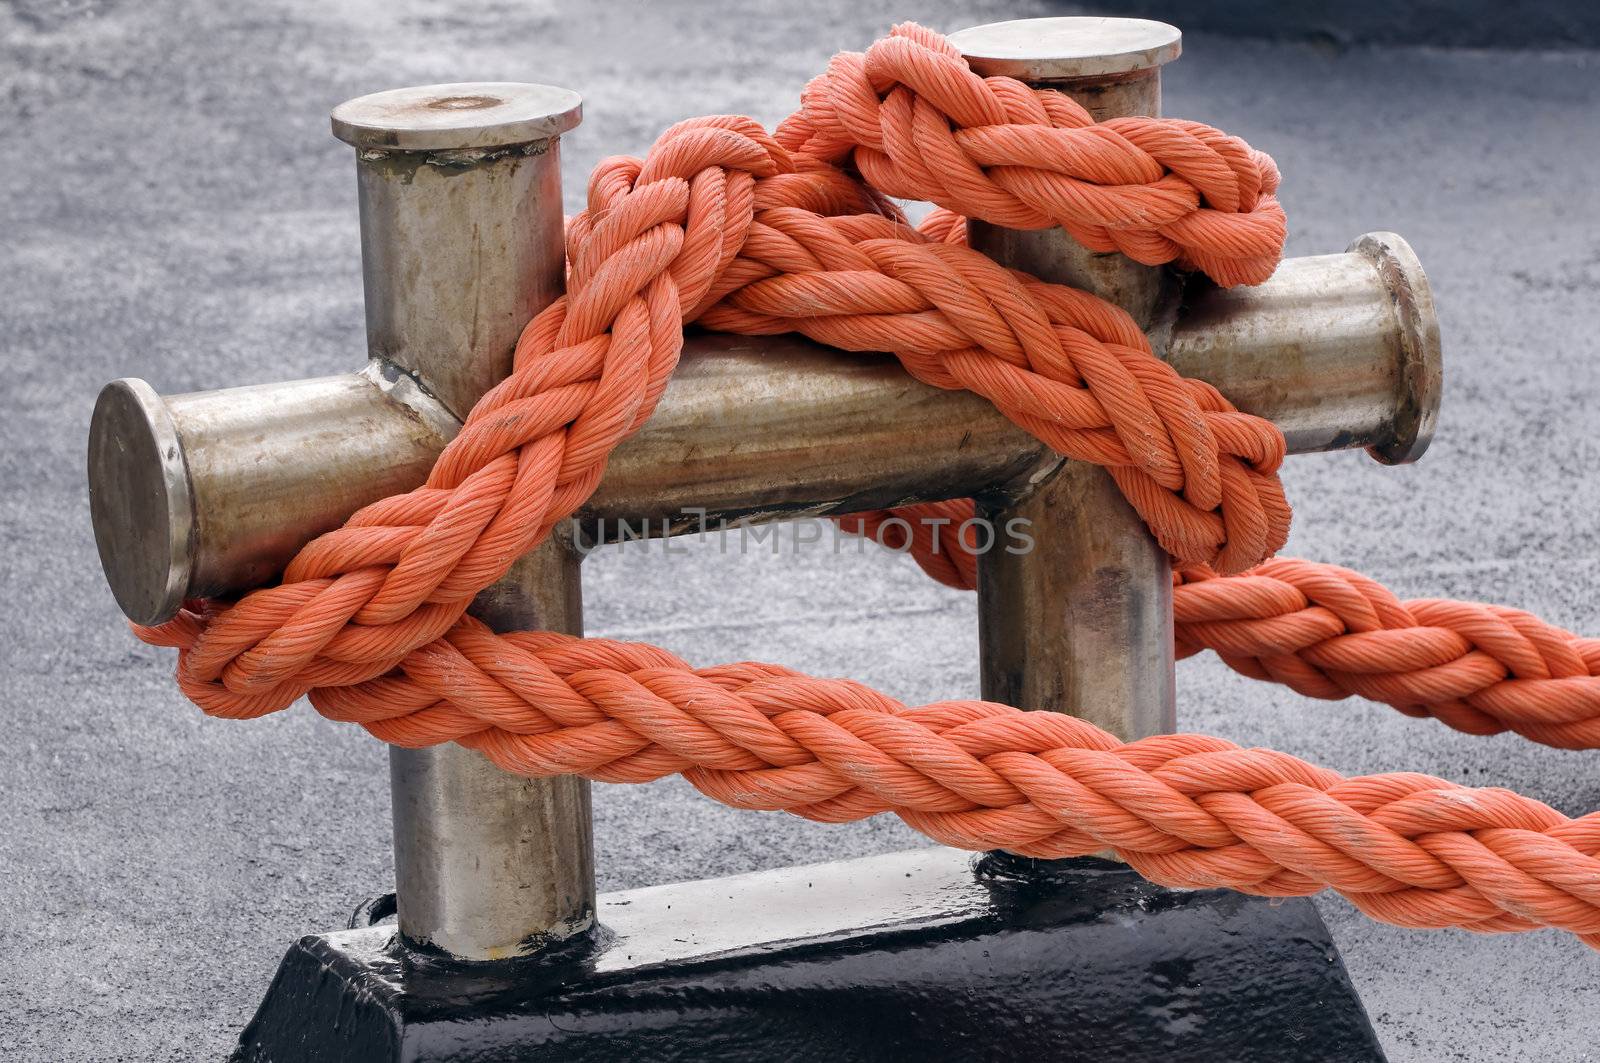 Close-up of an orange rope tied to a bitt